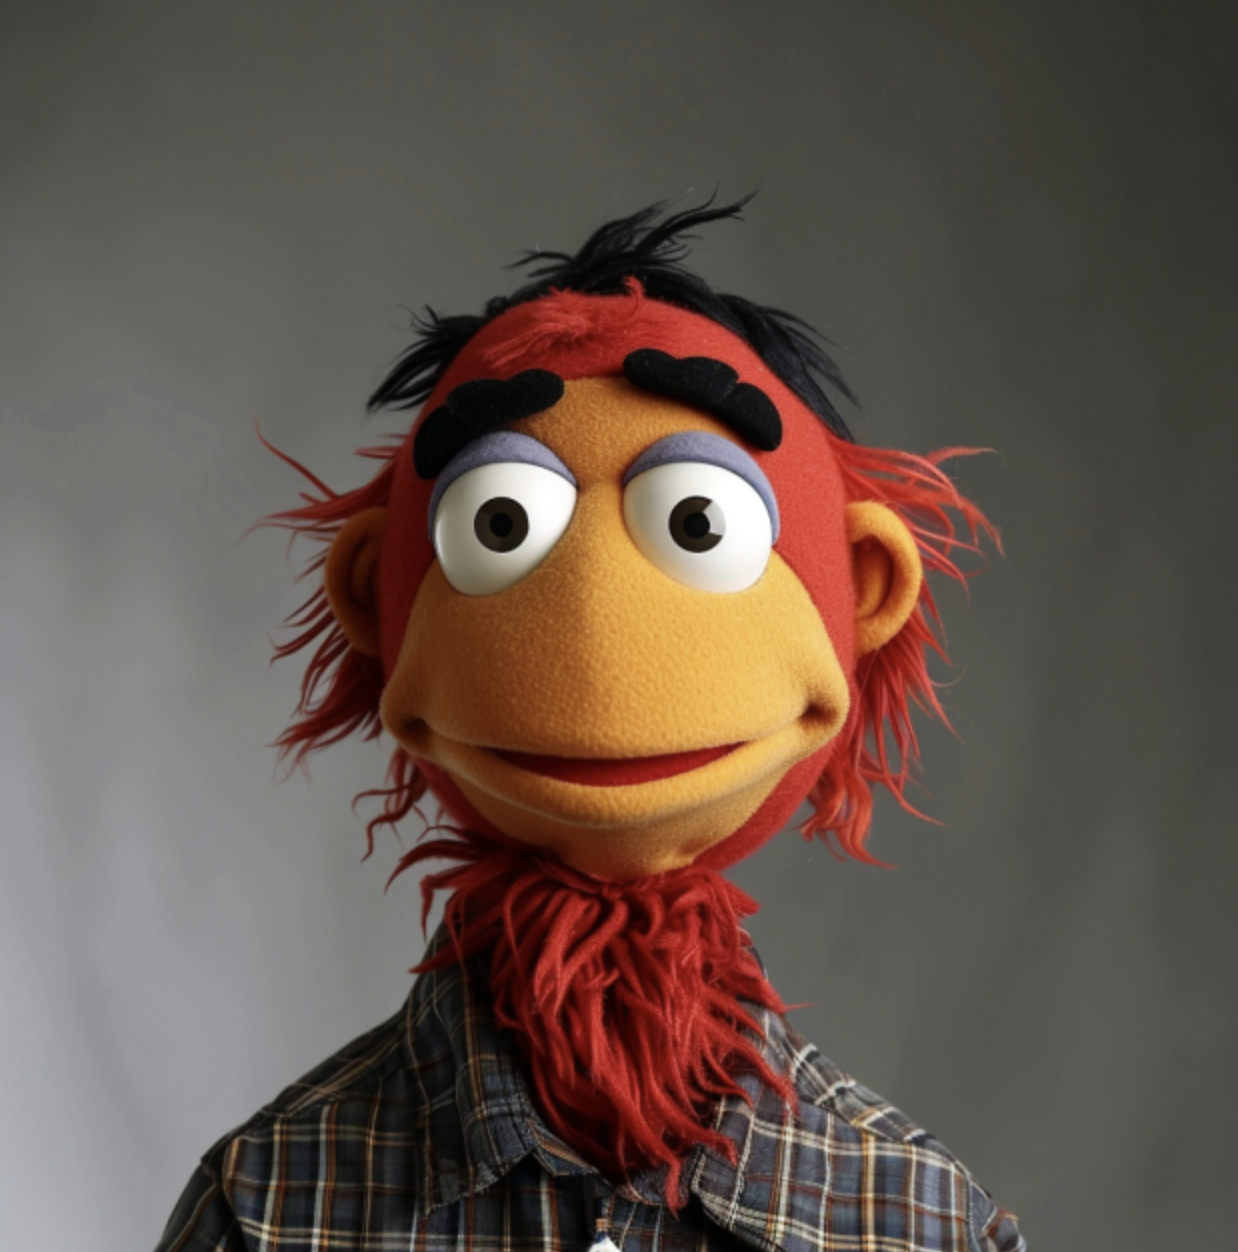 Close-up of a Muppet with red hair and eyebrows, smiling, wearing a checked shirt